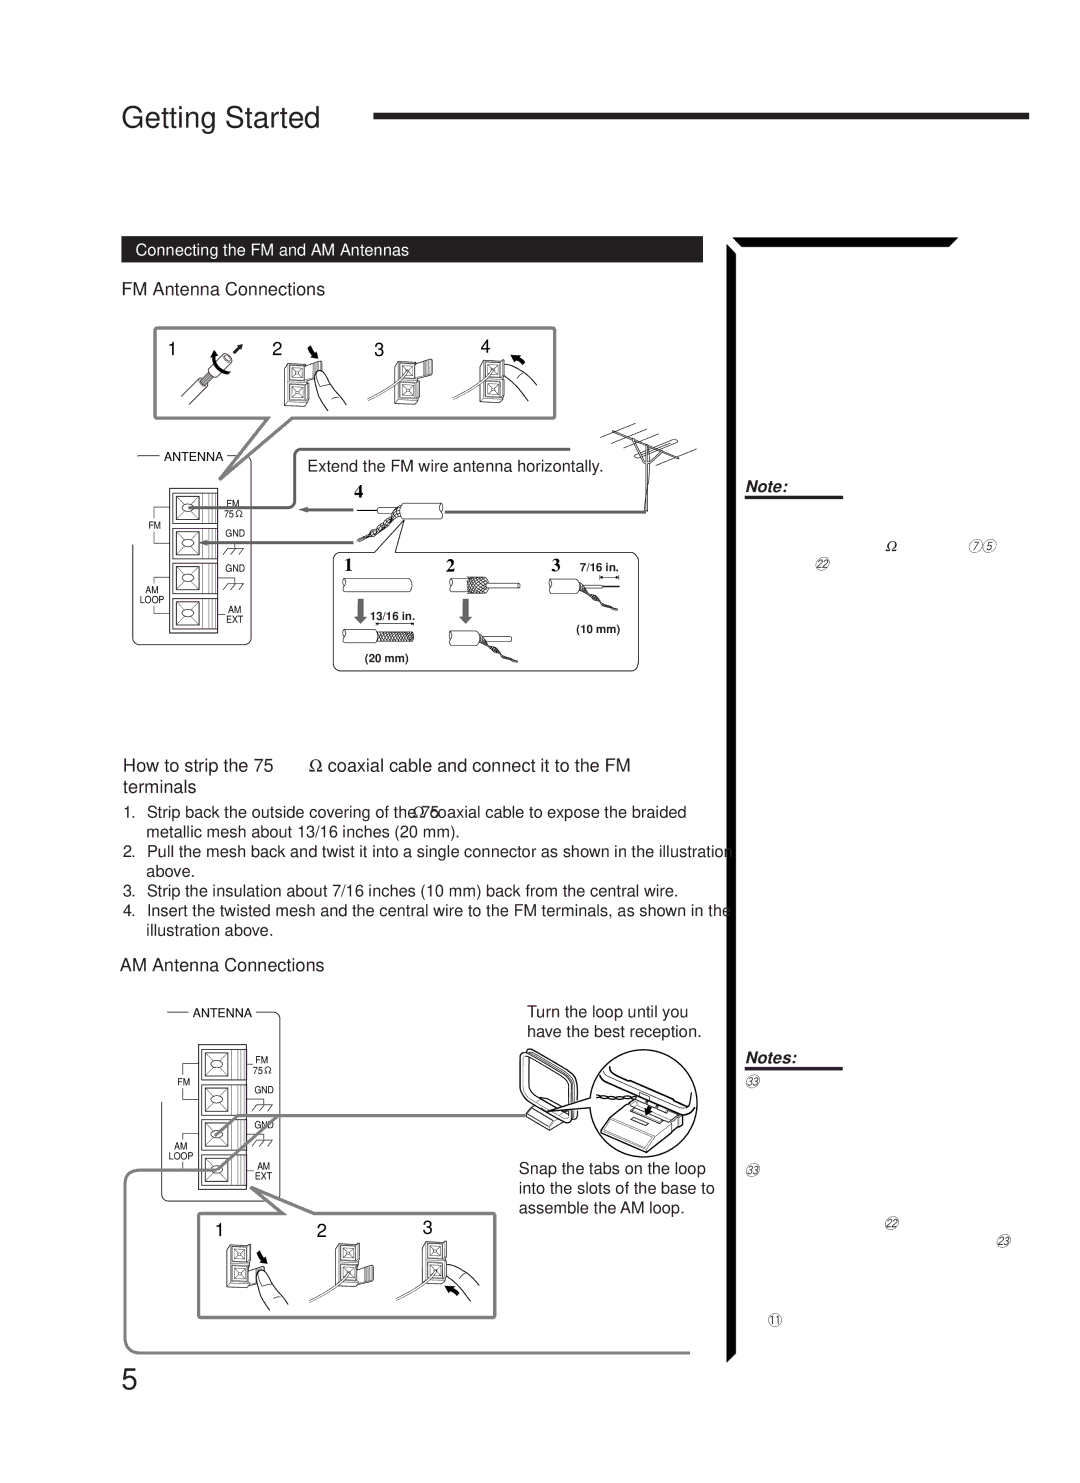 JVC RX-1024VBK manual Getting Started, FM Antenna Connections, AM Antenna Connections, Connecting the FM and AM Antennas 